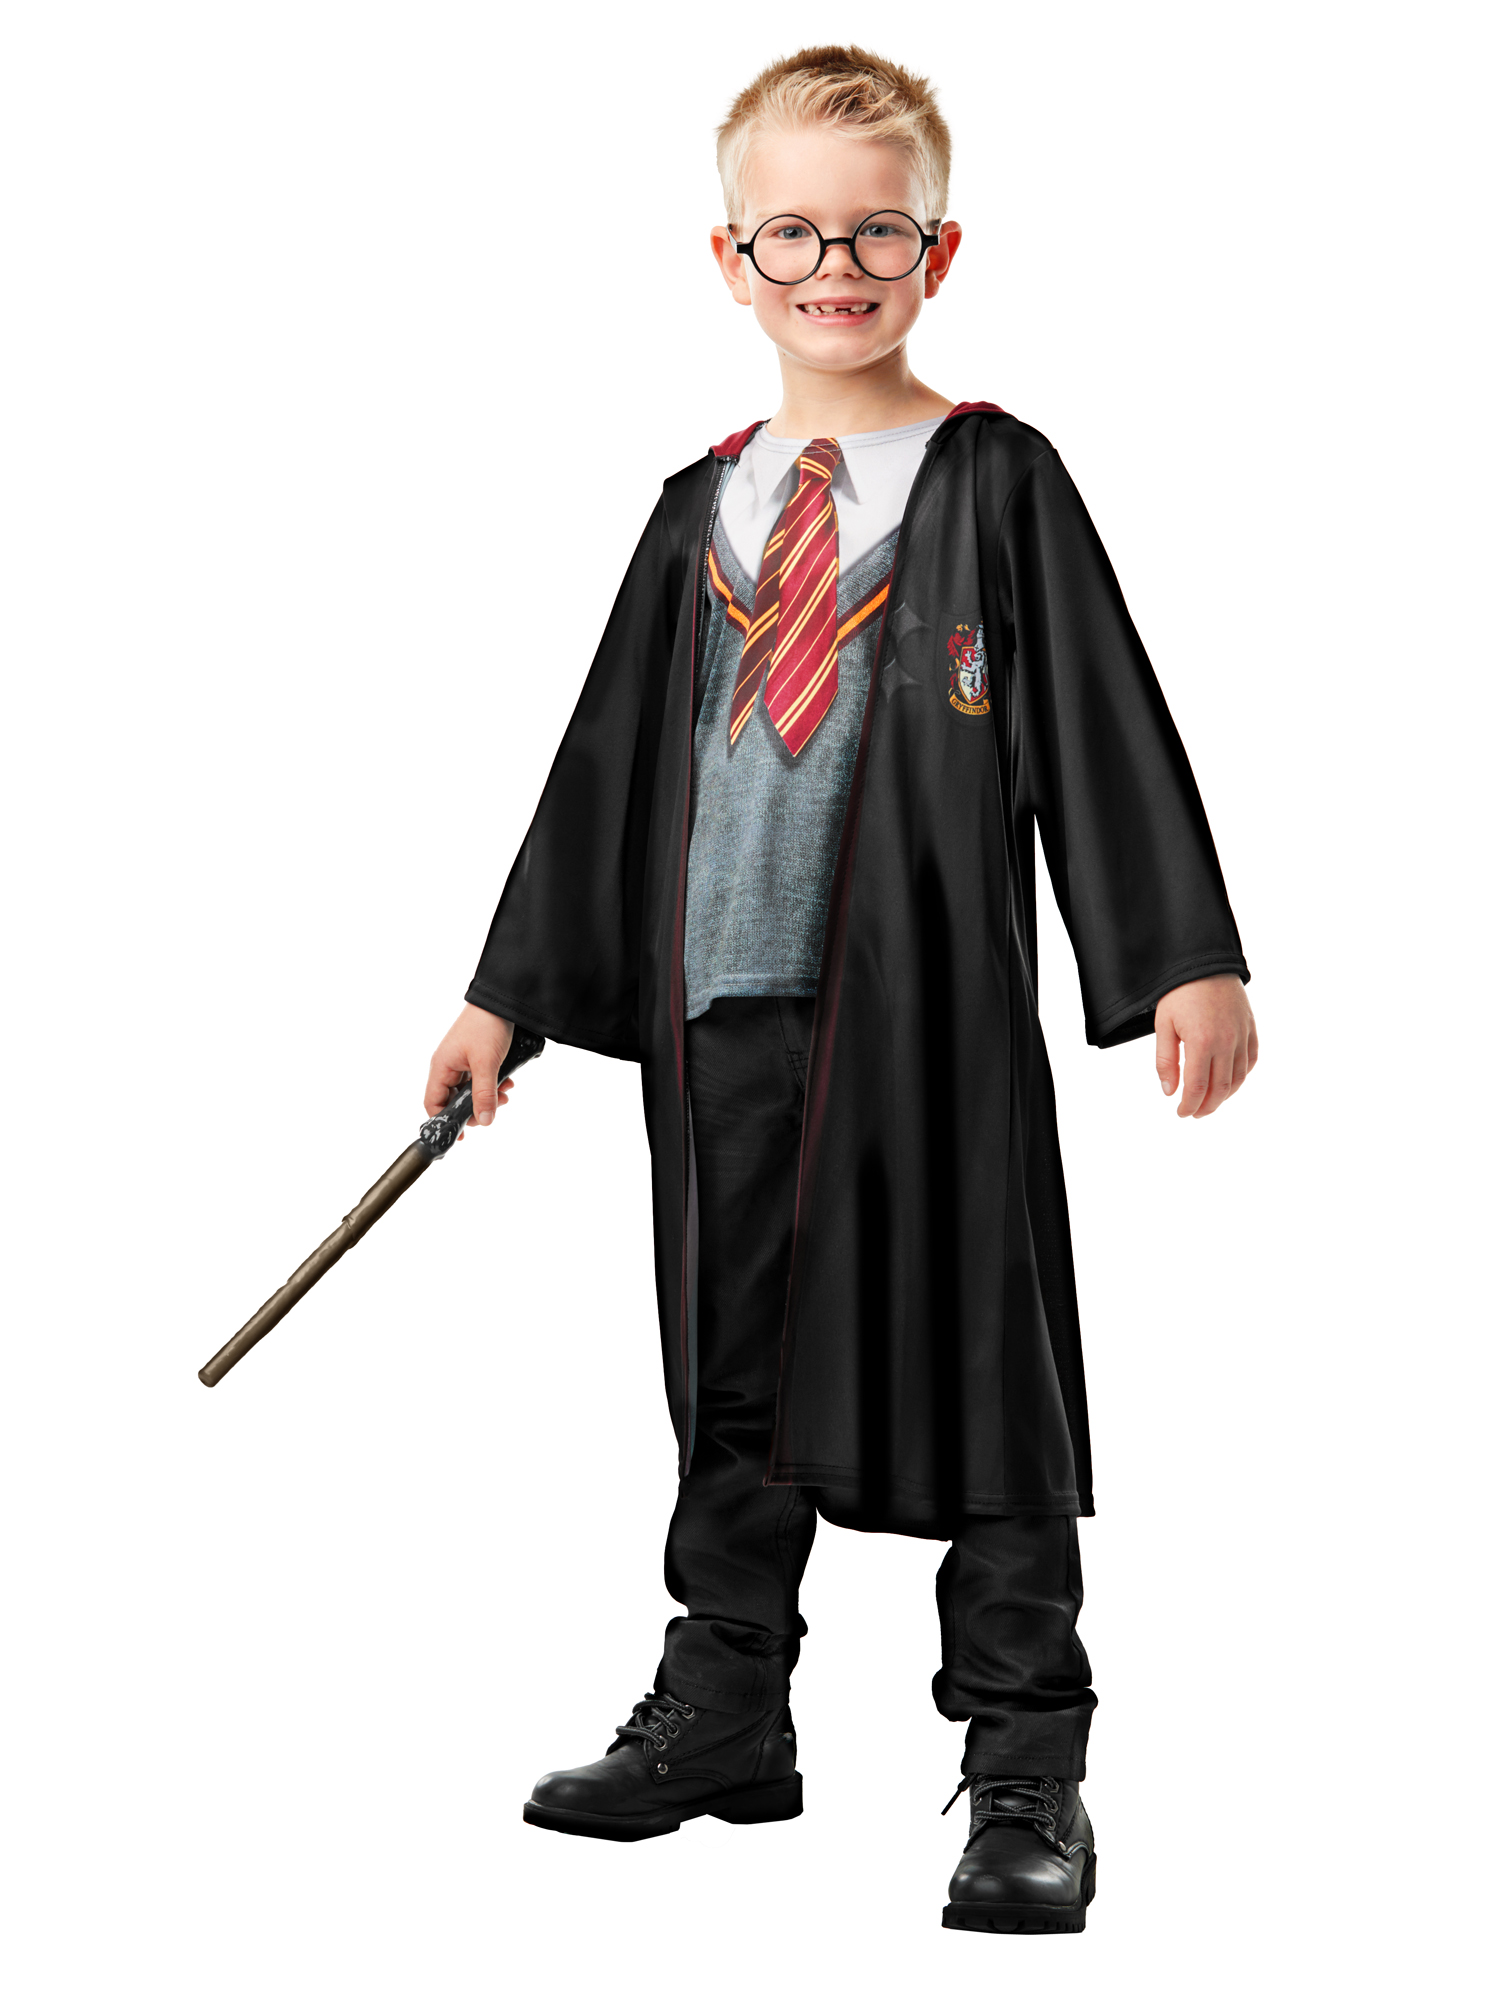 HRP HARRY POTTER ROBE DELUXE – CHILDRENS – Rubies Masquerade Co. (UK)